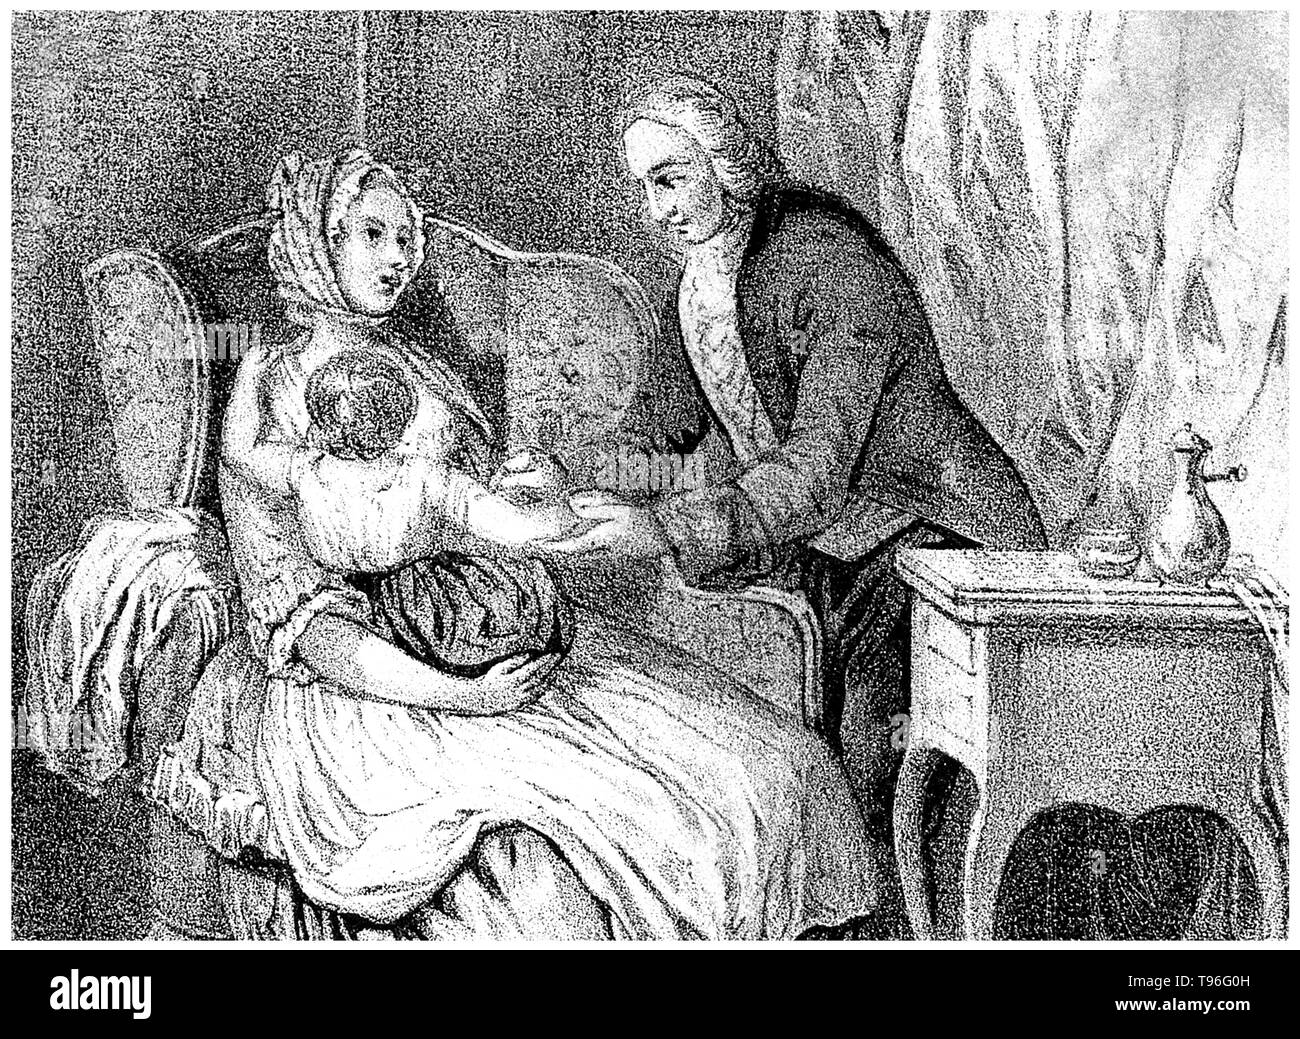 Edward Jenner vaccinates a young child on its mother's lap. Edward Jenner (May 17, 1749 - January 26, 1823) was an English physician and scientist who was the pioneer of smallpox vaccine, the world's first vaccine. His work is said to have saved more lives than the work of any other human. In Jenner’s time, smallpox killed around 10 percent of the population, with the number as high as 20 percent in towns and cities where infection spread more easily. Stock Photo